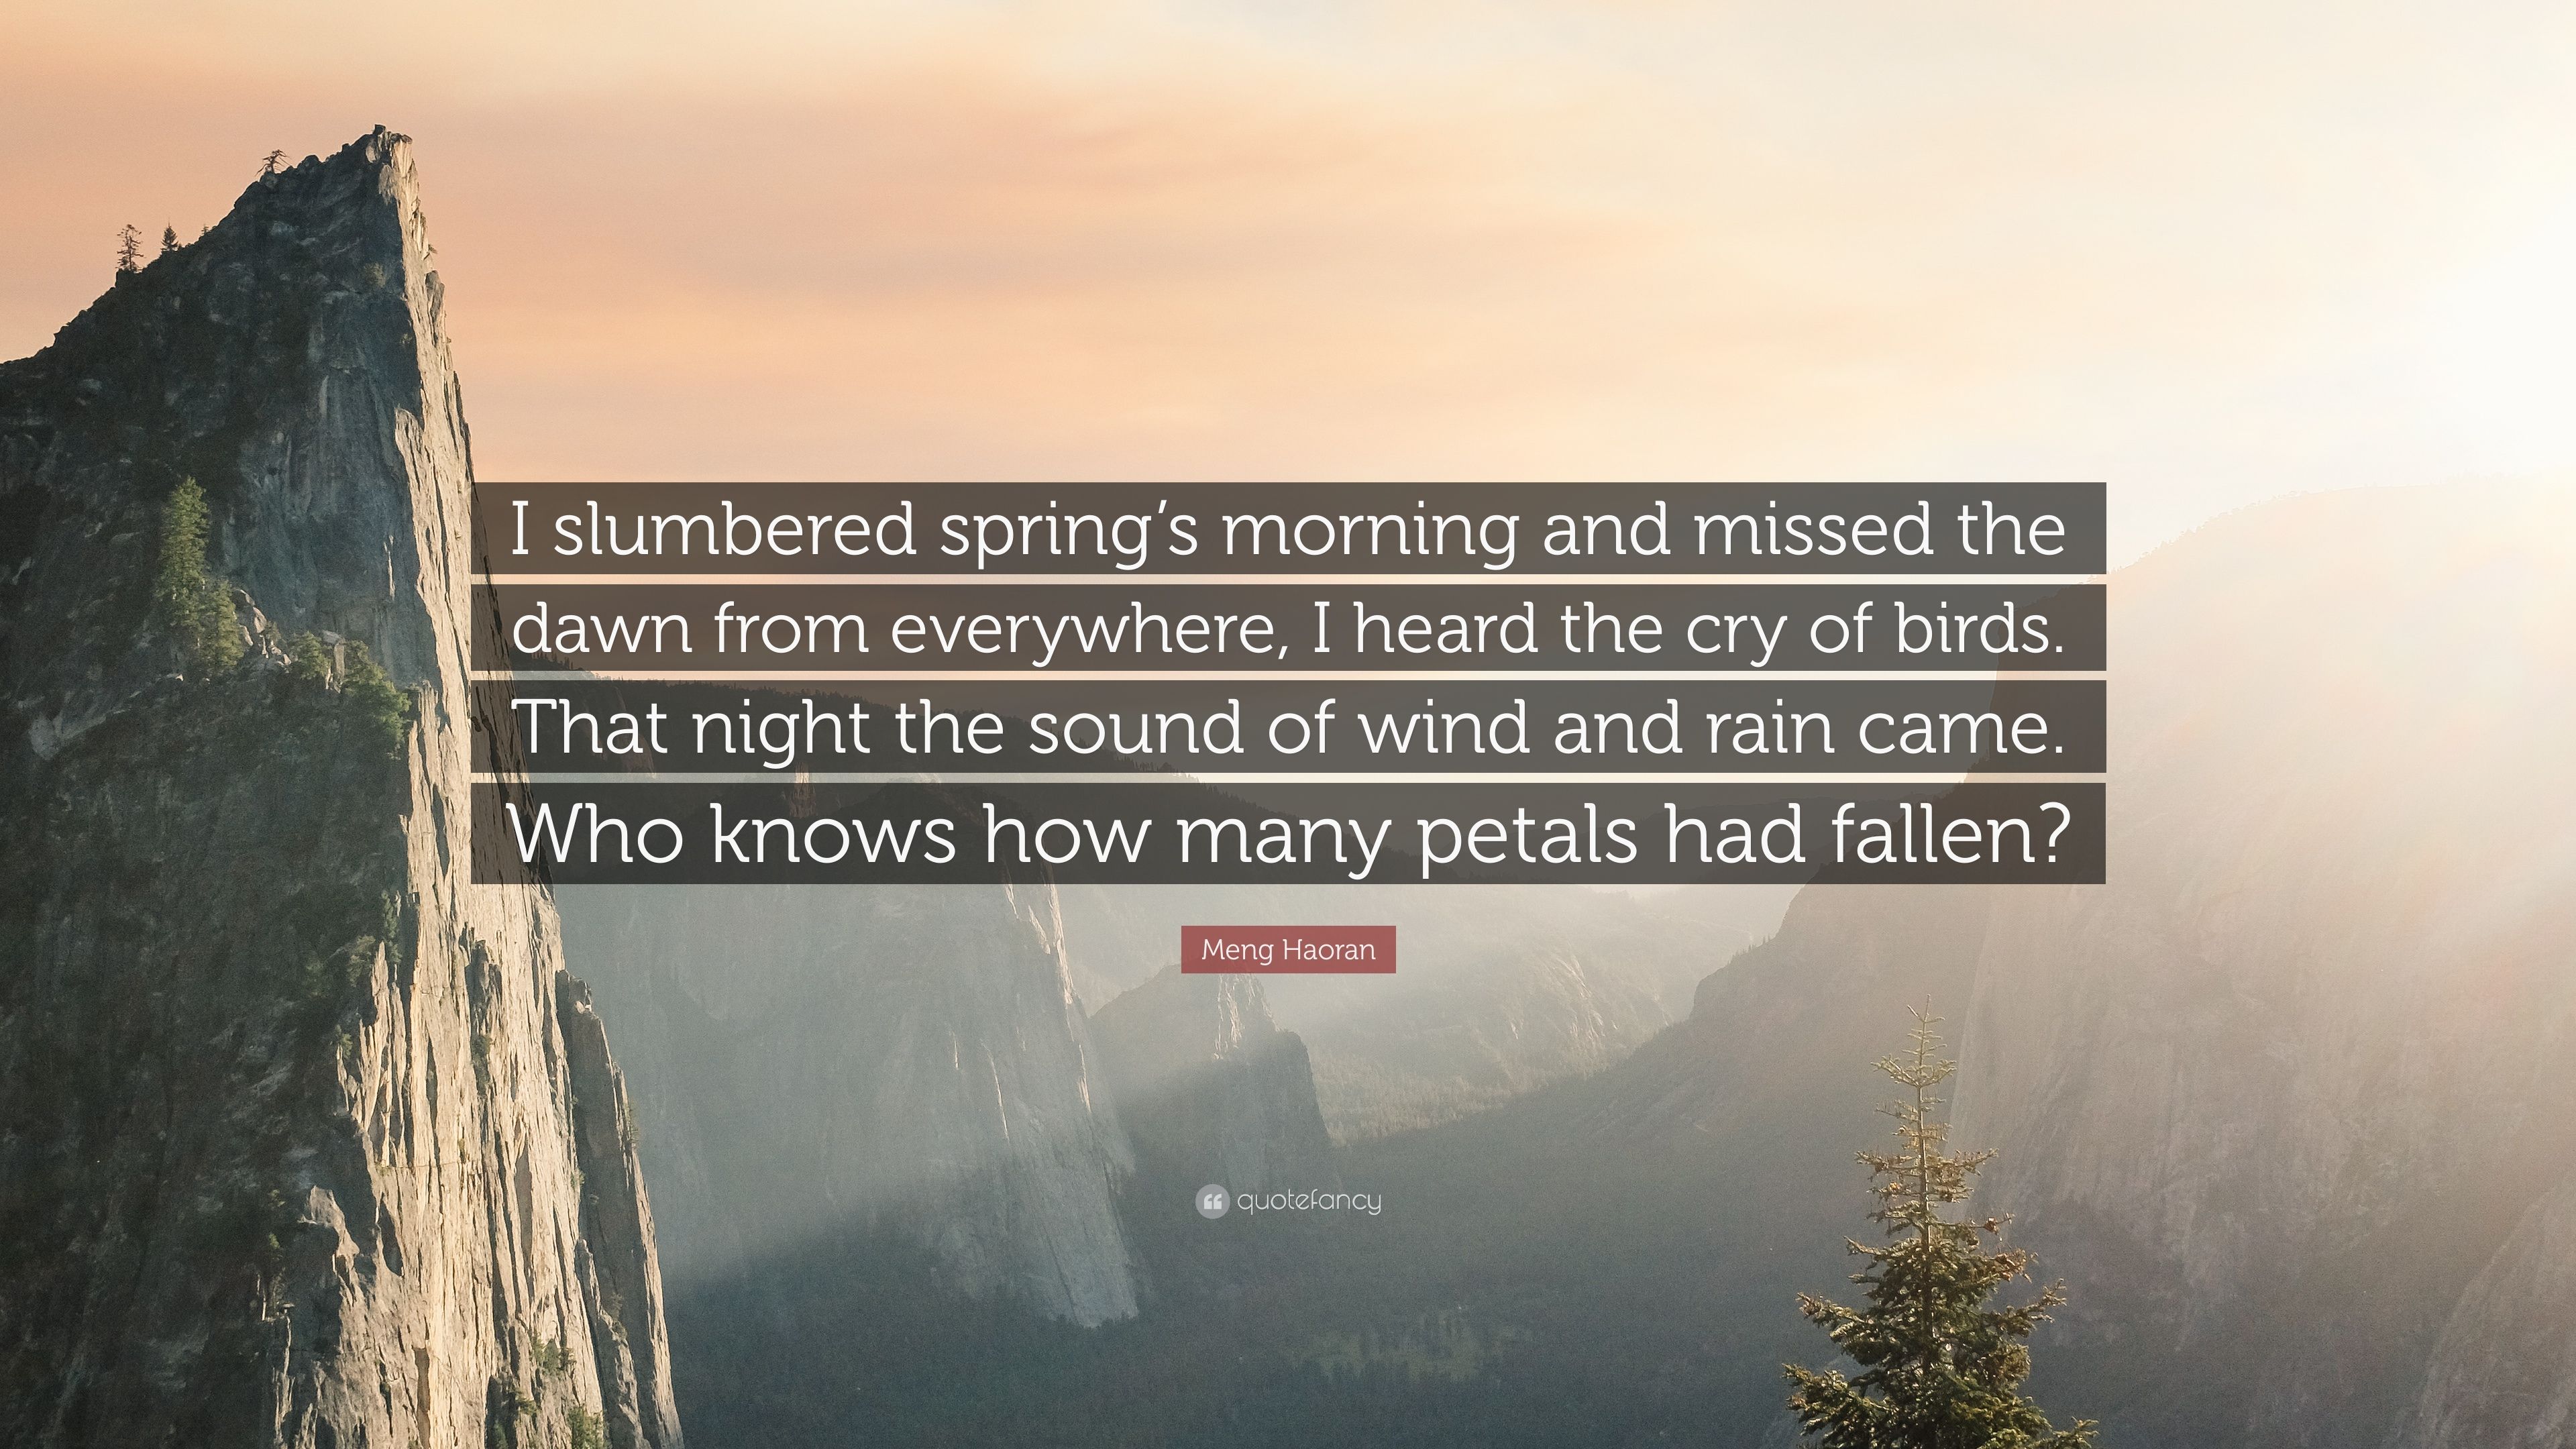 Meng Haoran Quote: “I slumbered spring's morning and missed